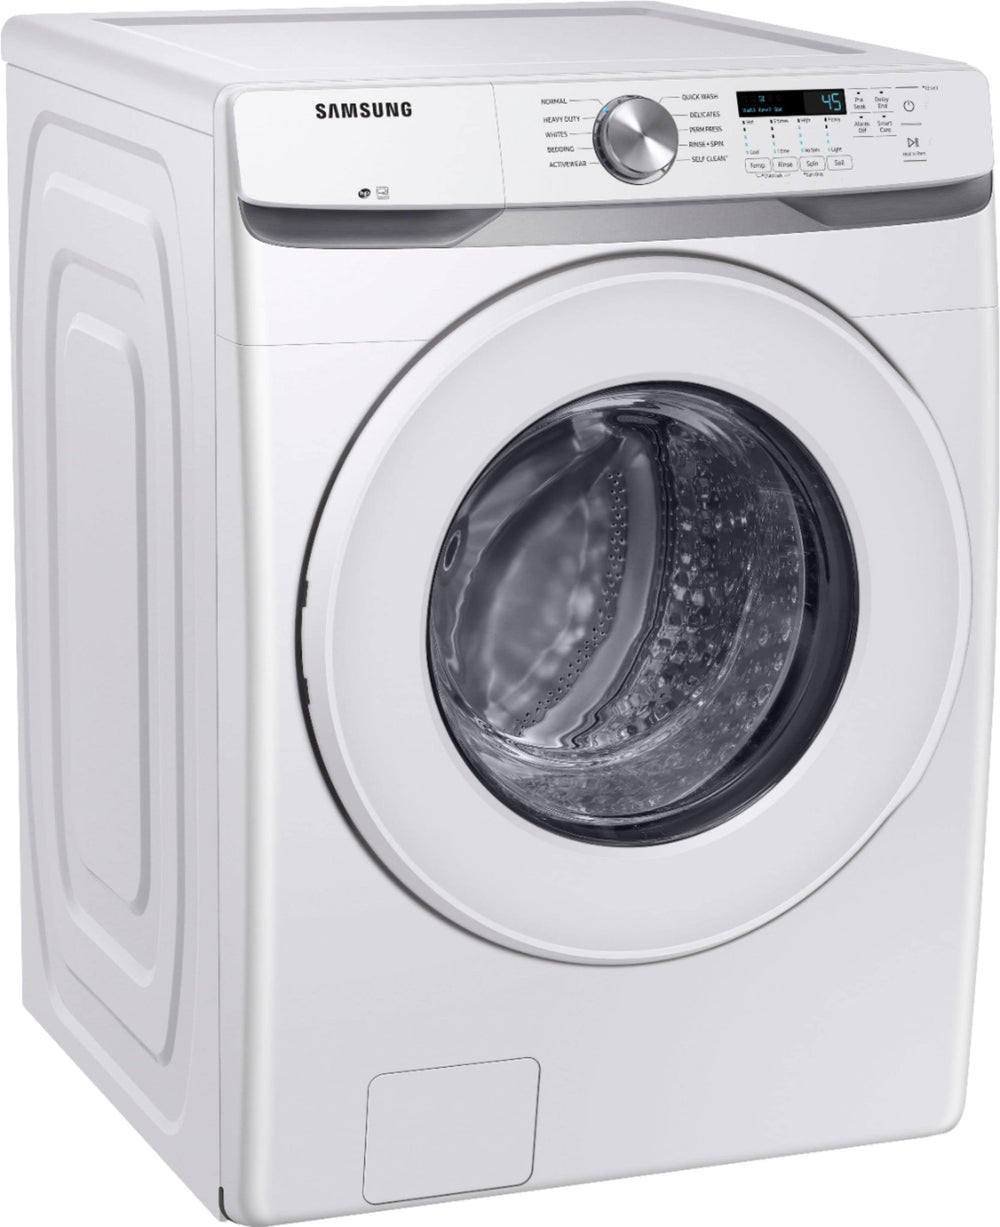 Samsung - 4.5 Cu. Ft. High Efficiency Stackable Front Load Washer with Vibration Reduction Technology+ - White_1